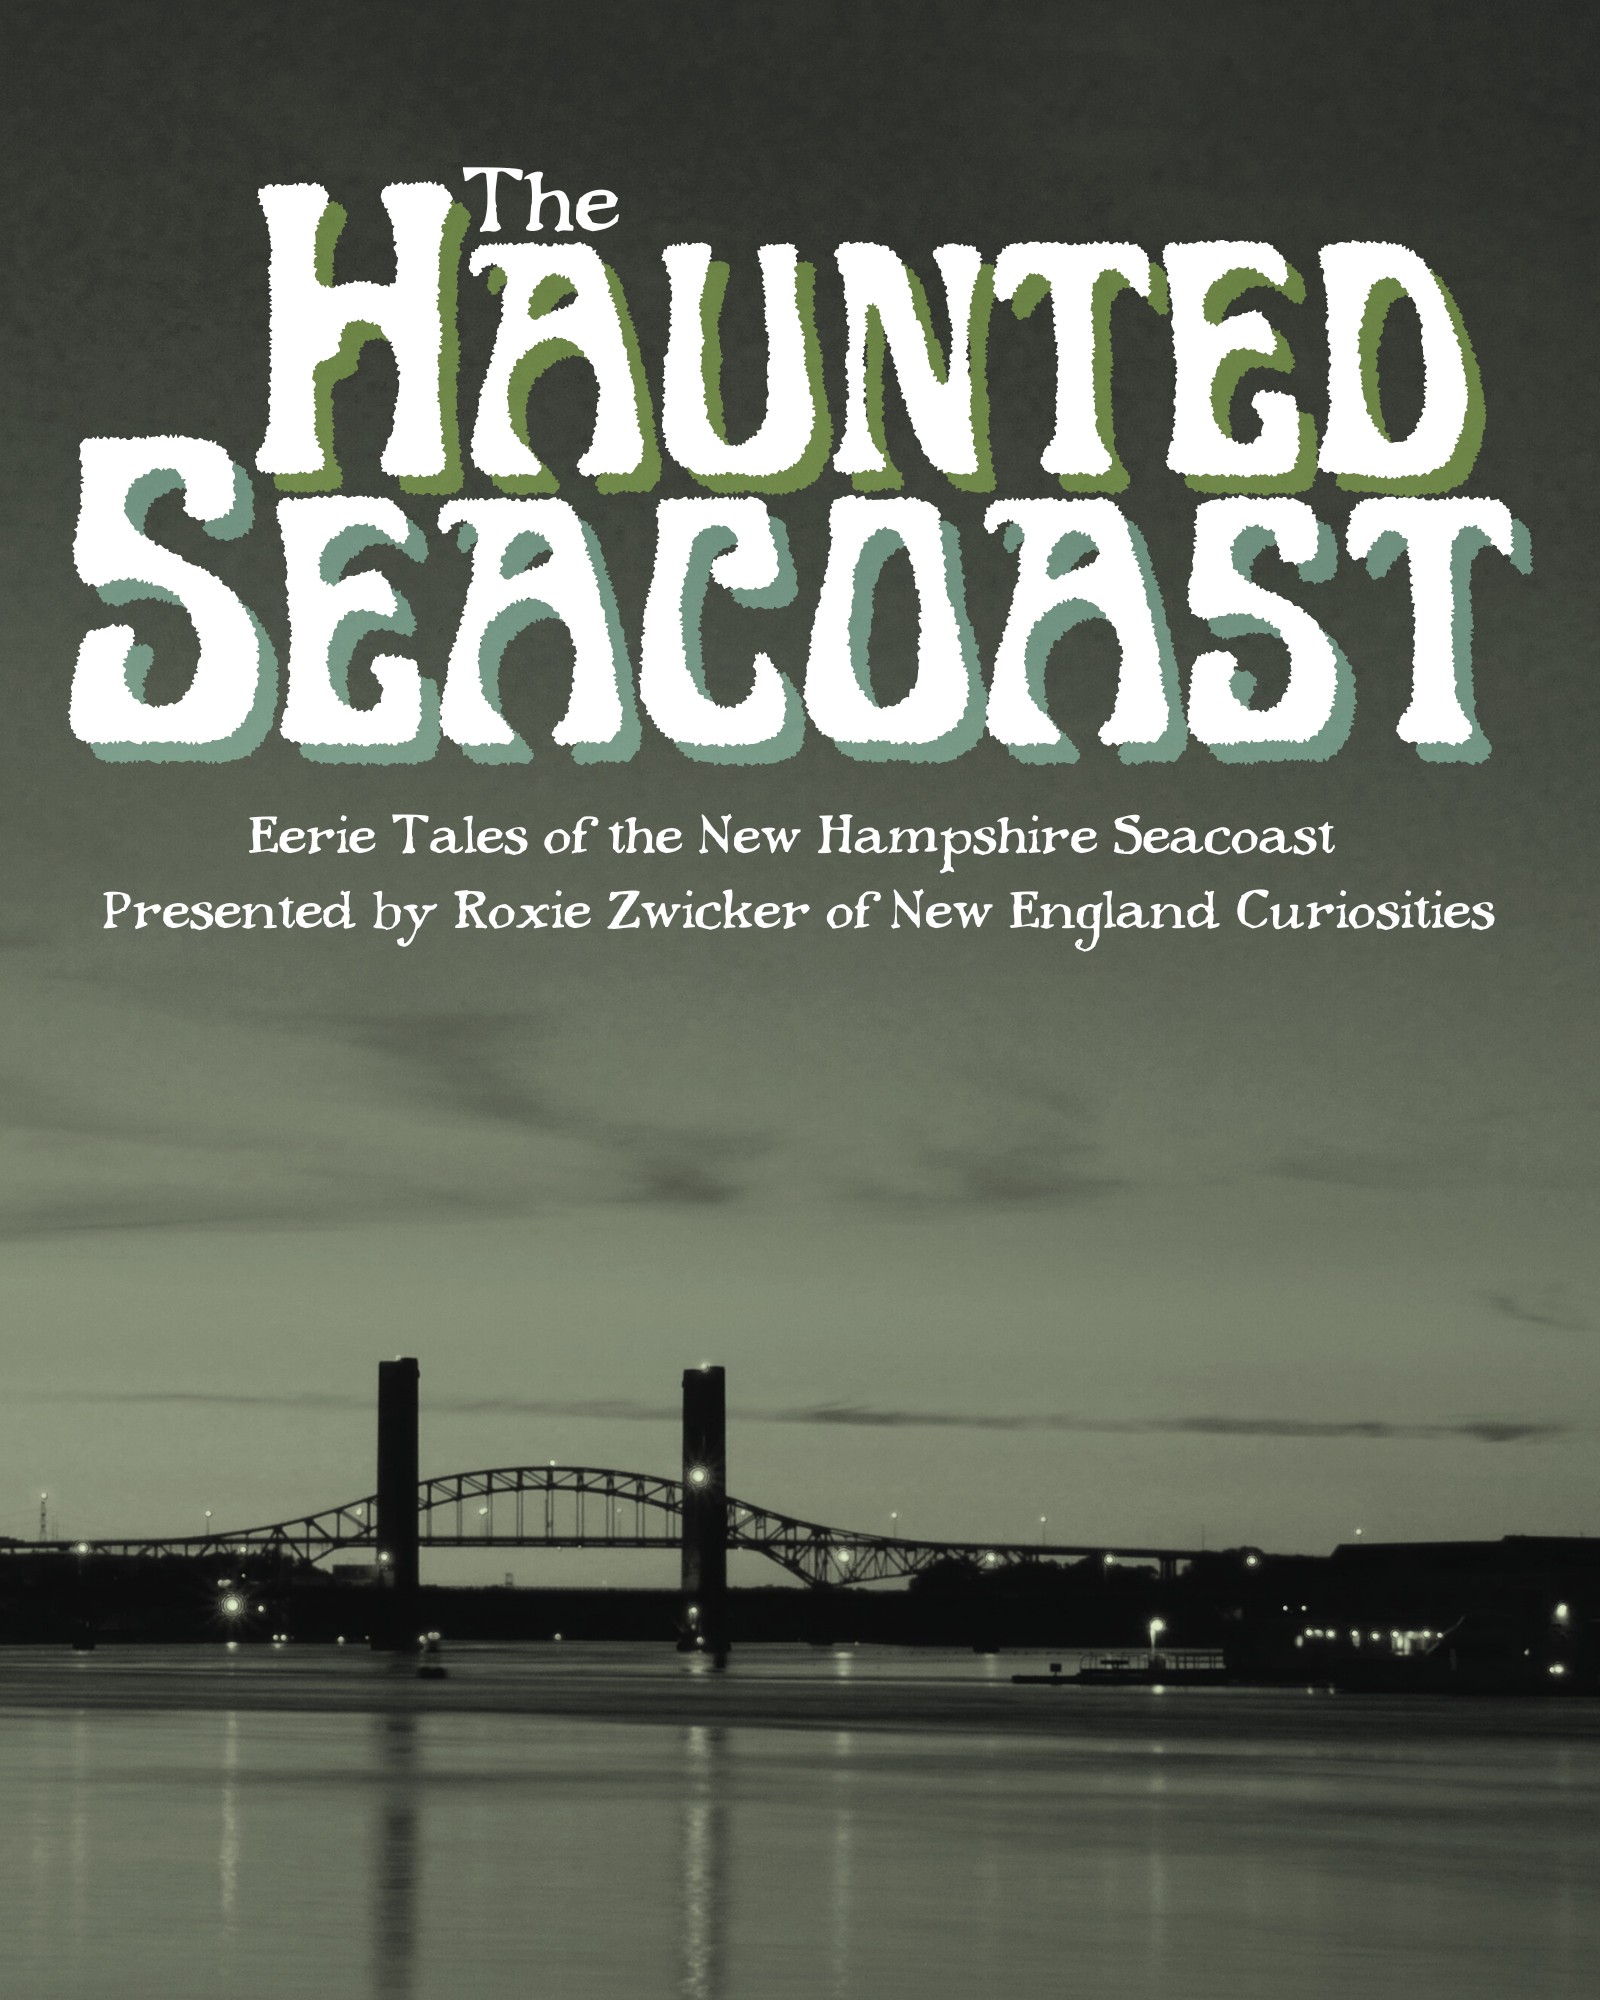 eerie portsmouth bridge photo with the text The Haunted Seacoast eerie tales from the new hampshire seacoast presented by Roxie Zwicker of New England Curiosities.